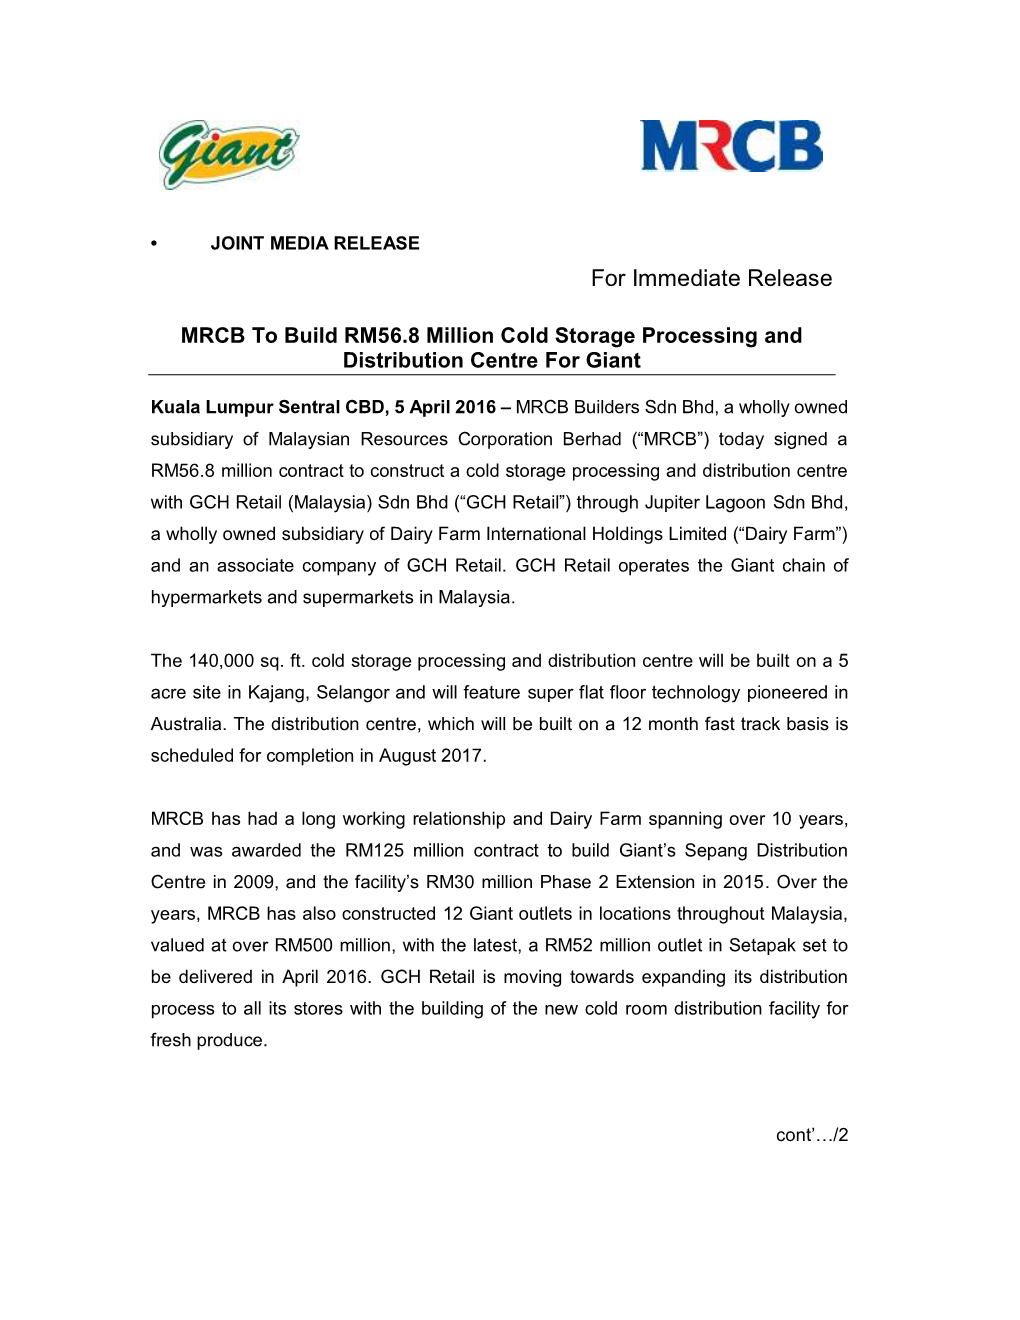 MRCB to Build RM56.8 Million Cold Storage Processing and Distribution Centre for Giant